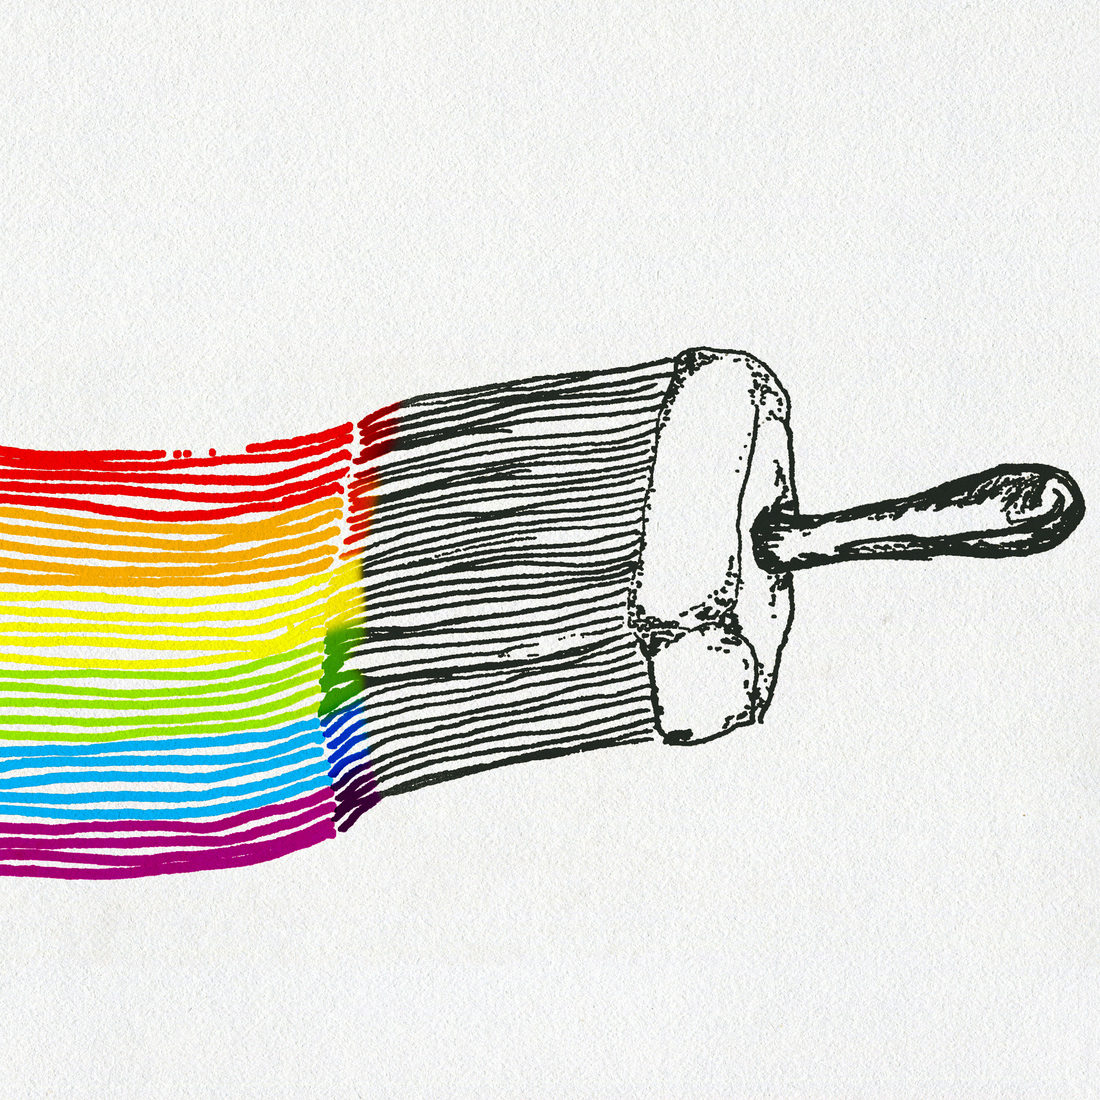 LGBT flag, artistic illustration, pen, ink ant watercolour drawing on paper, notebook artwork